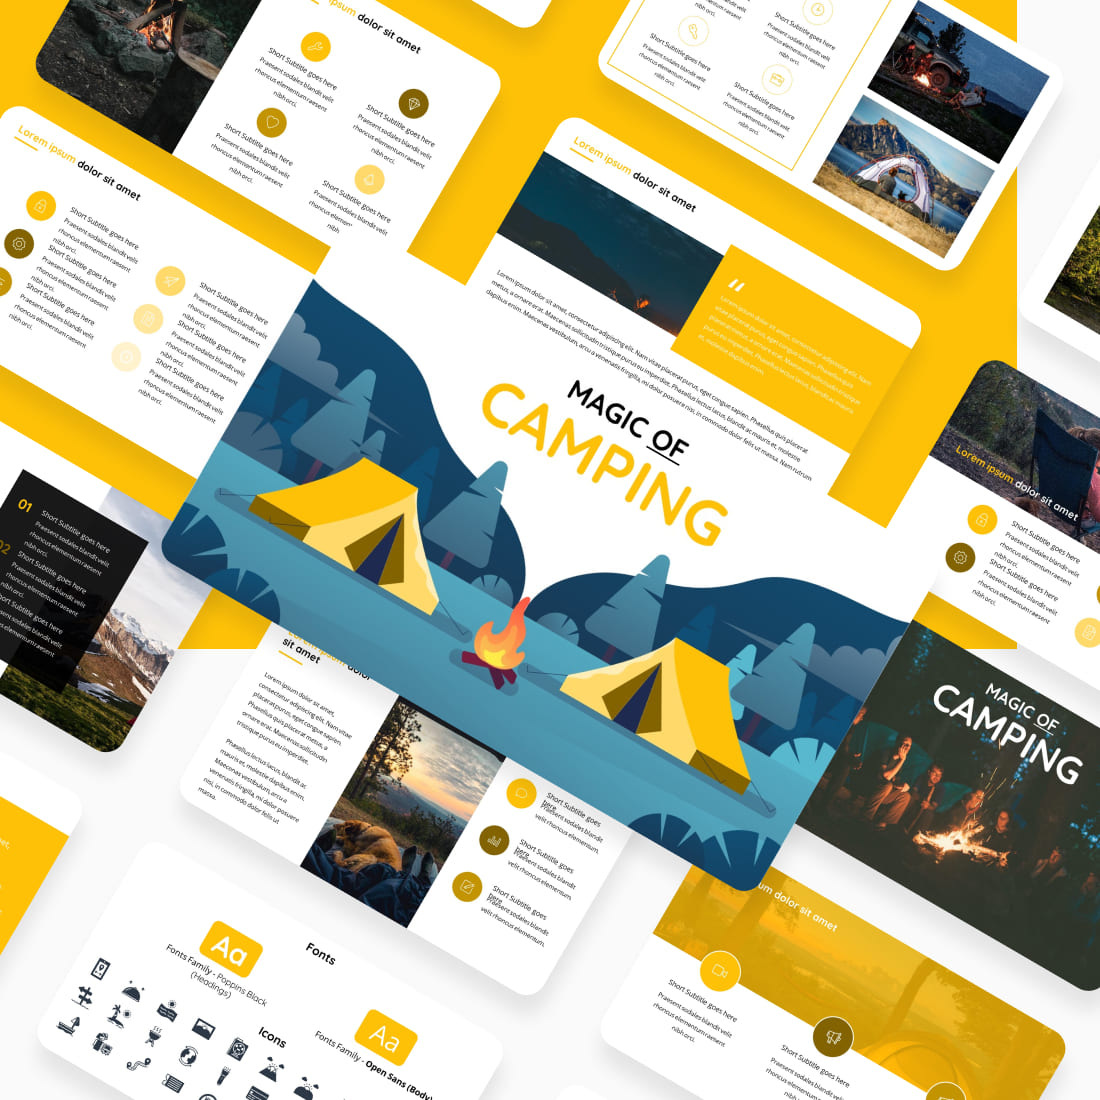 Camping PowerPoint Template cover image.